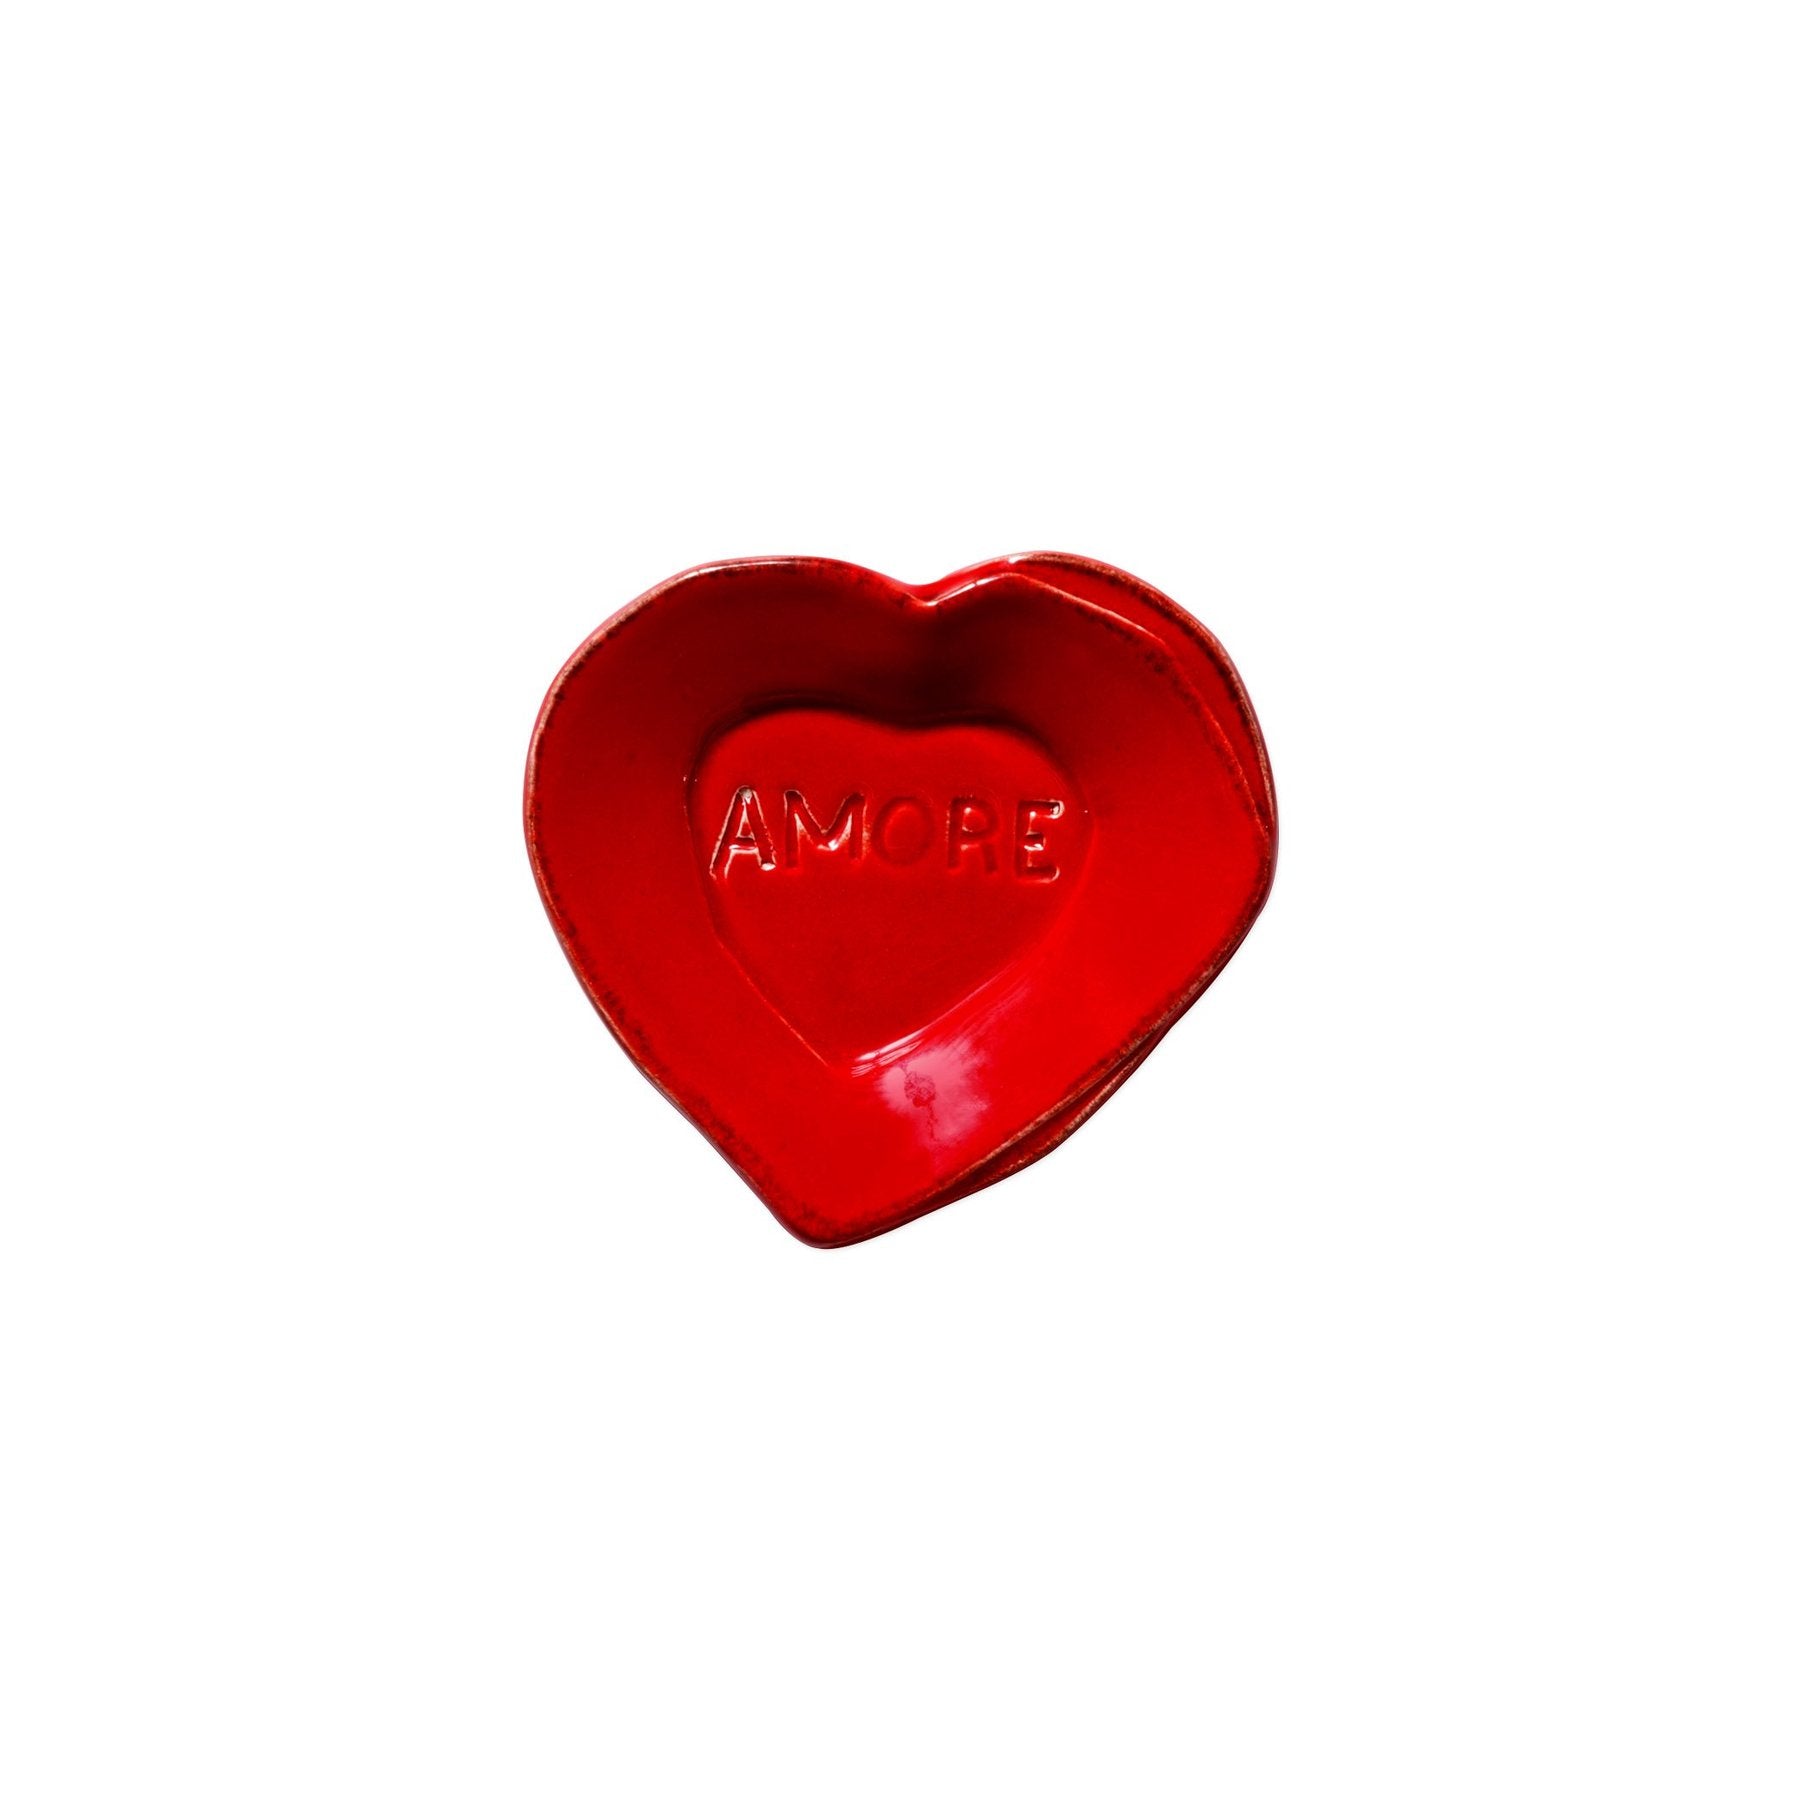 Lastra Red Heart Mini "Amore" Plate